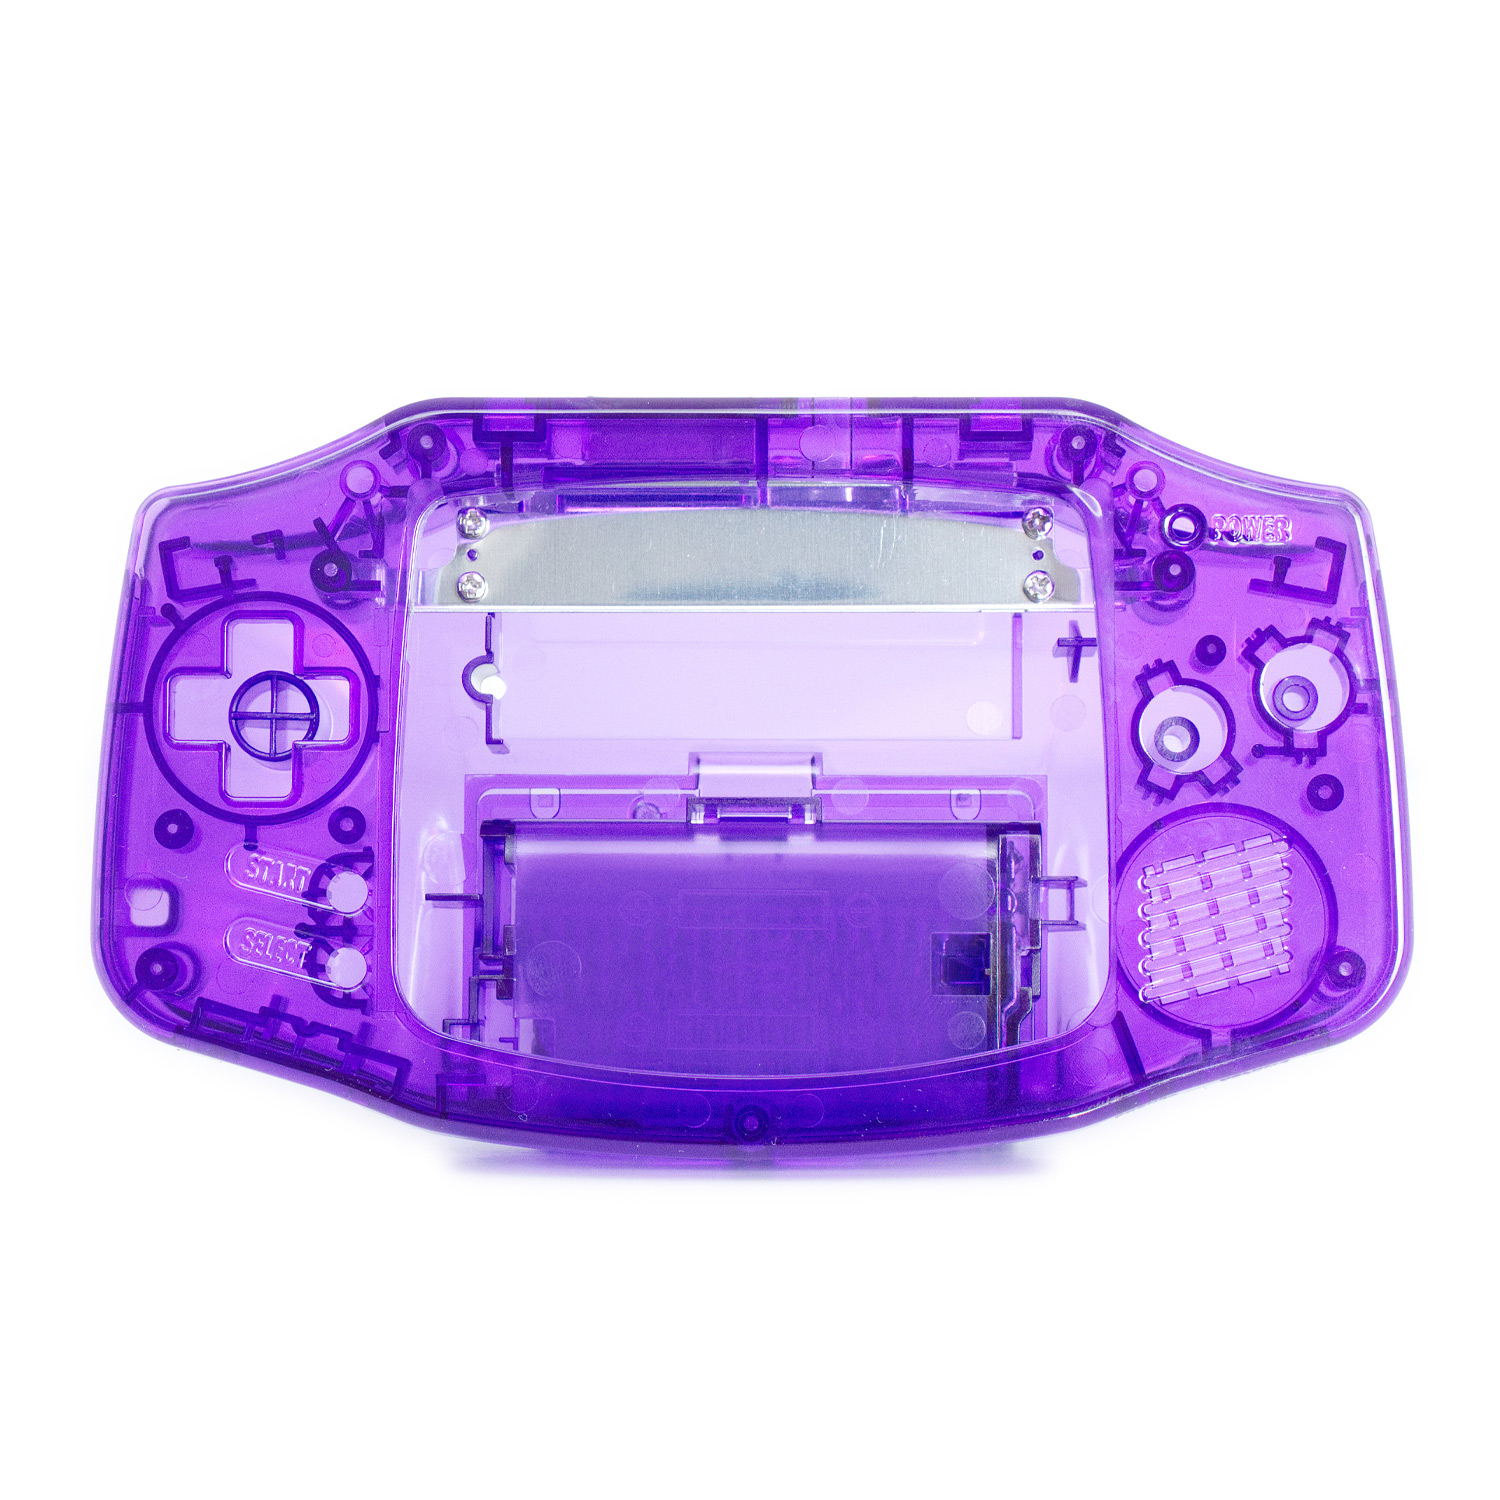 Game Boy Advance Shell for CleanScreen Laminated Kit (Crystal Purple)